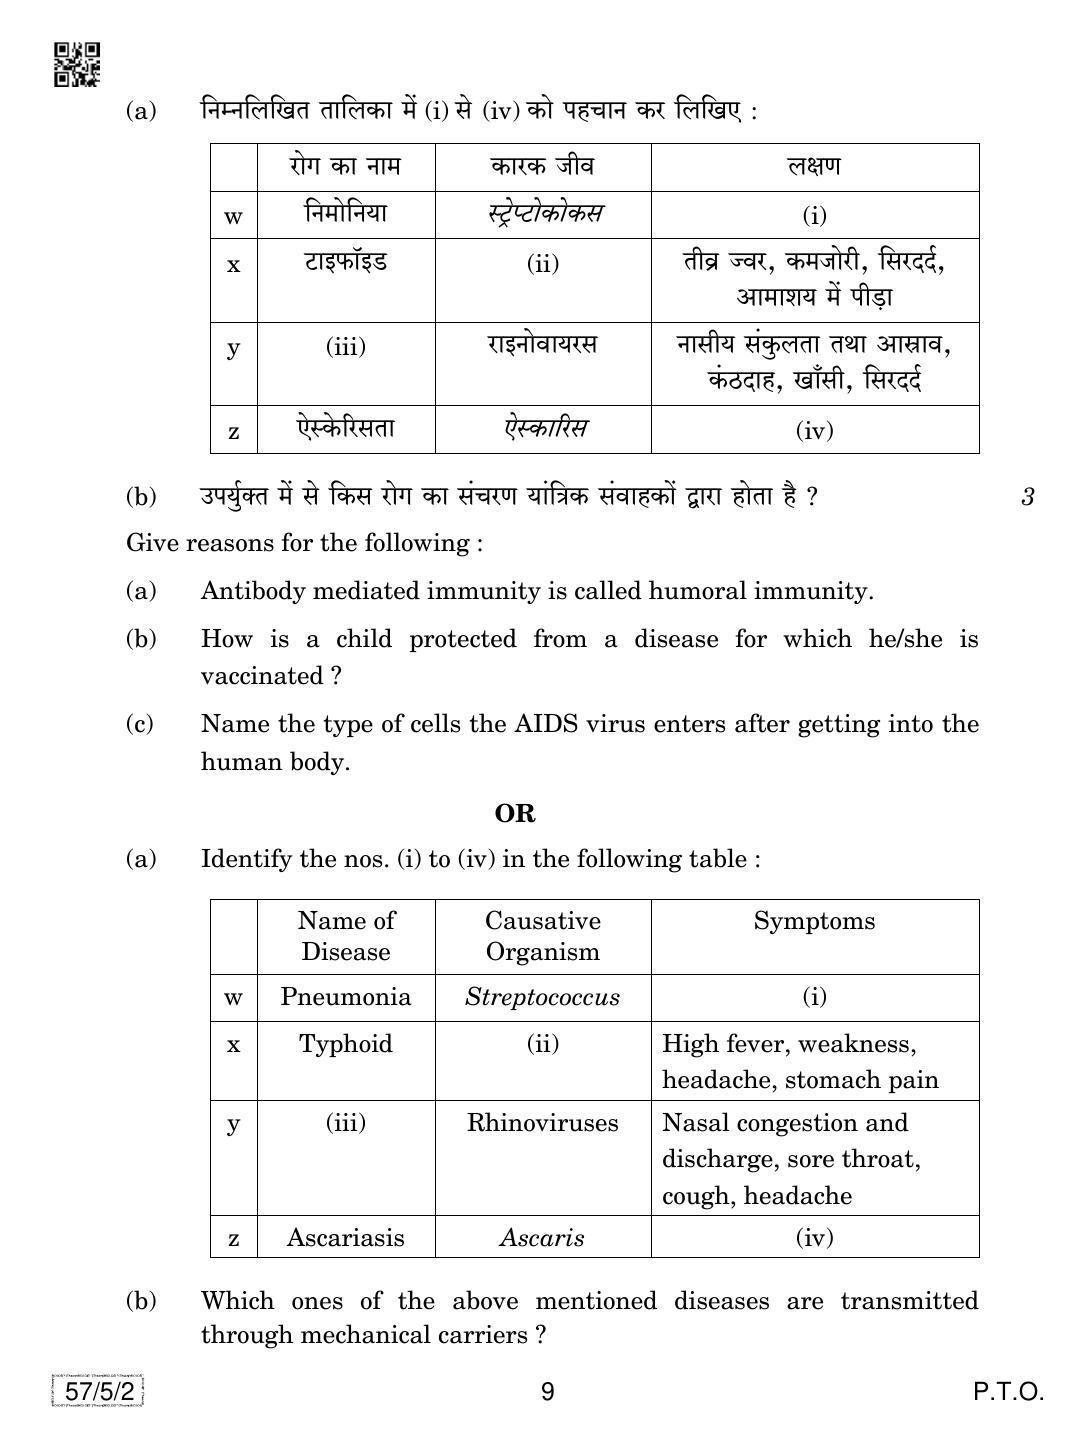 CBSE Class 12 57-5-2 Biology 2019 Question Paper - Page 9